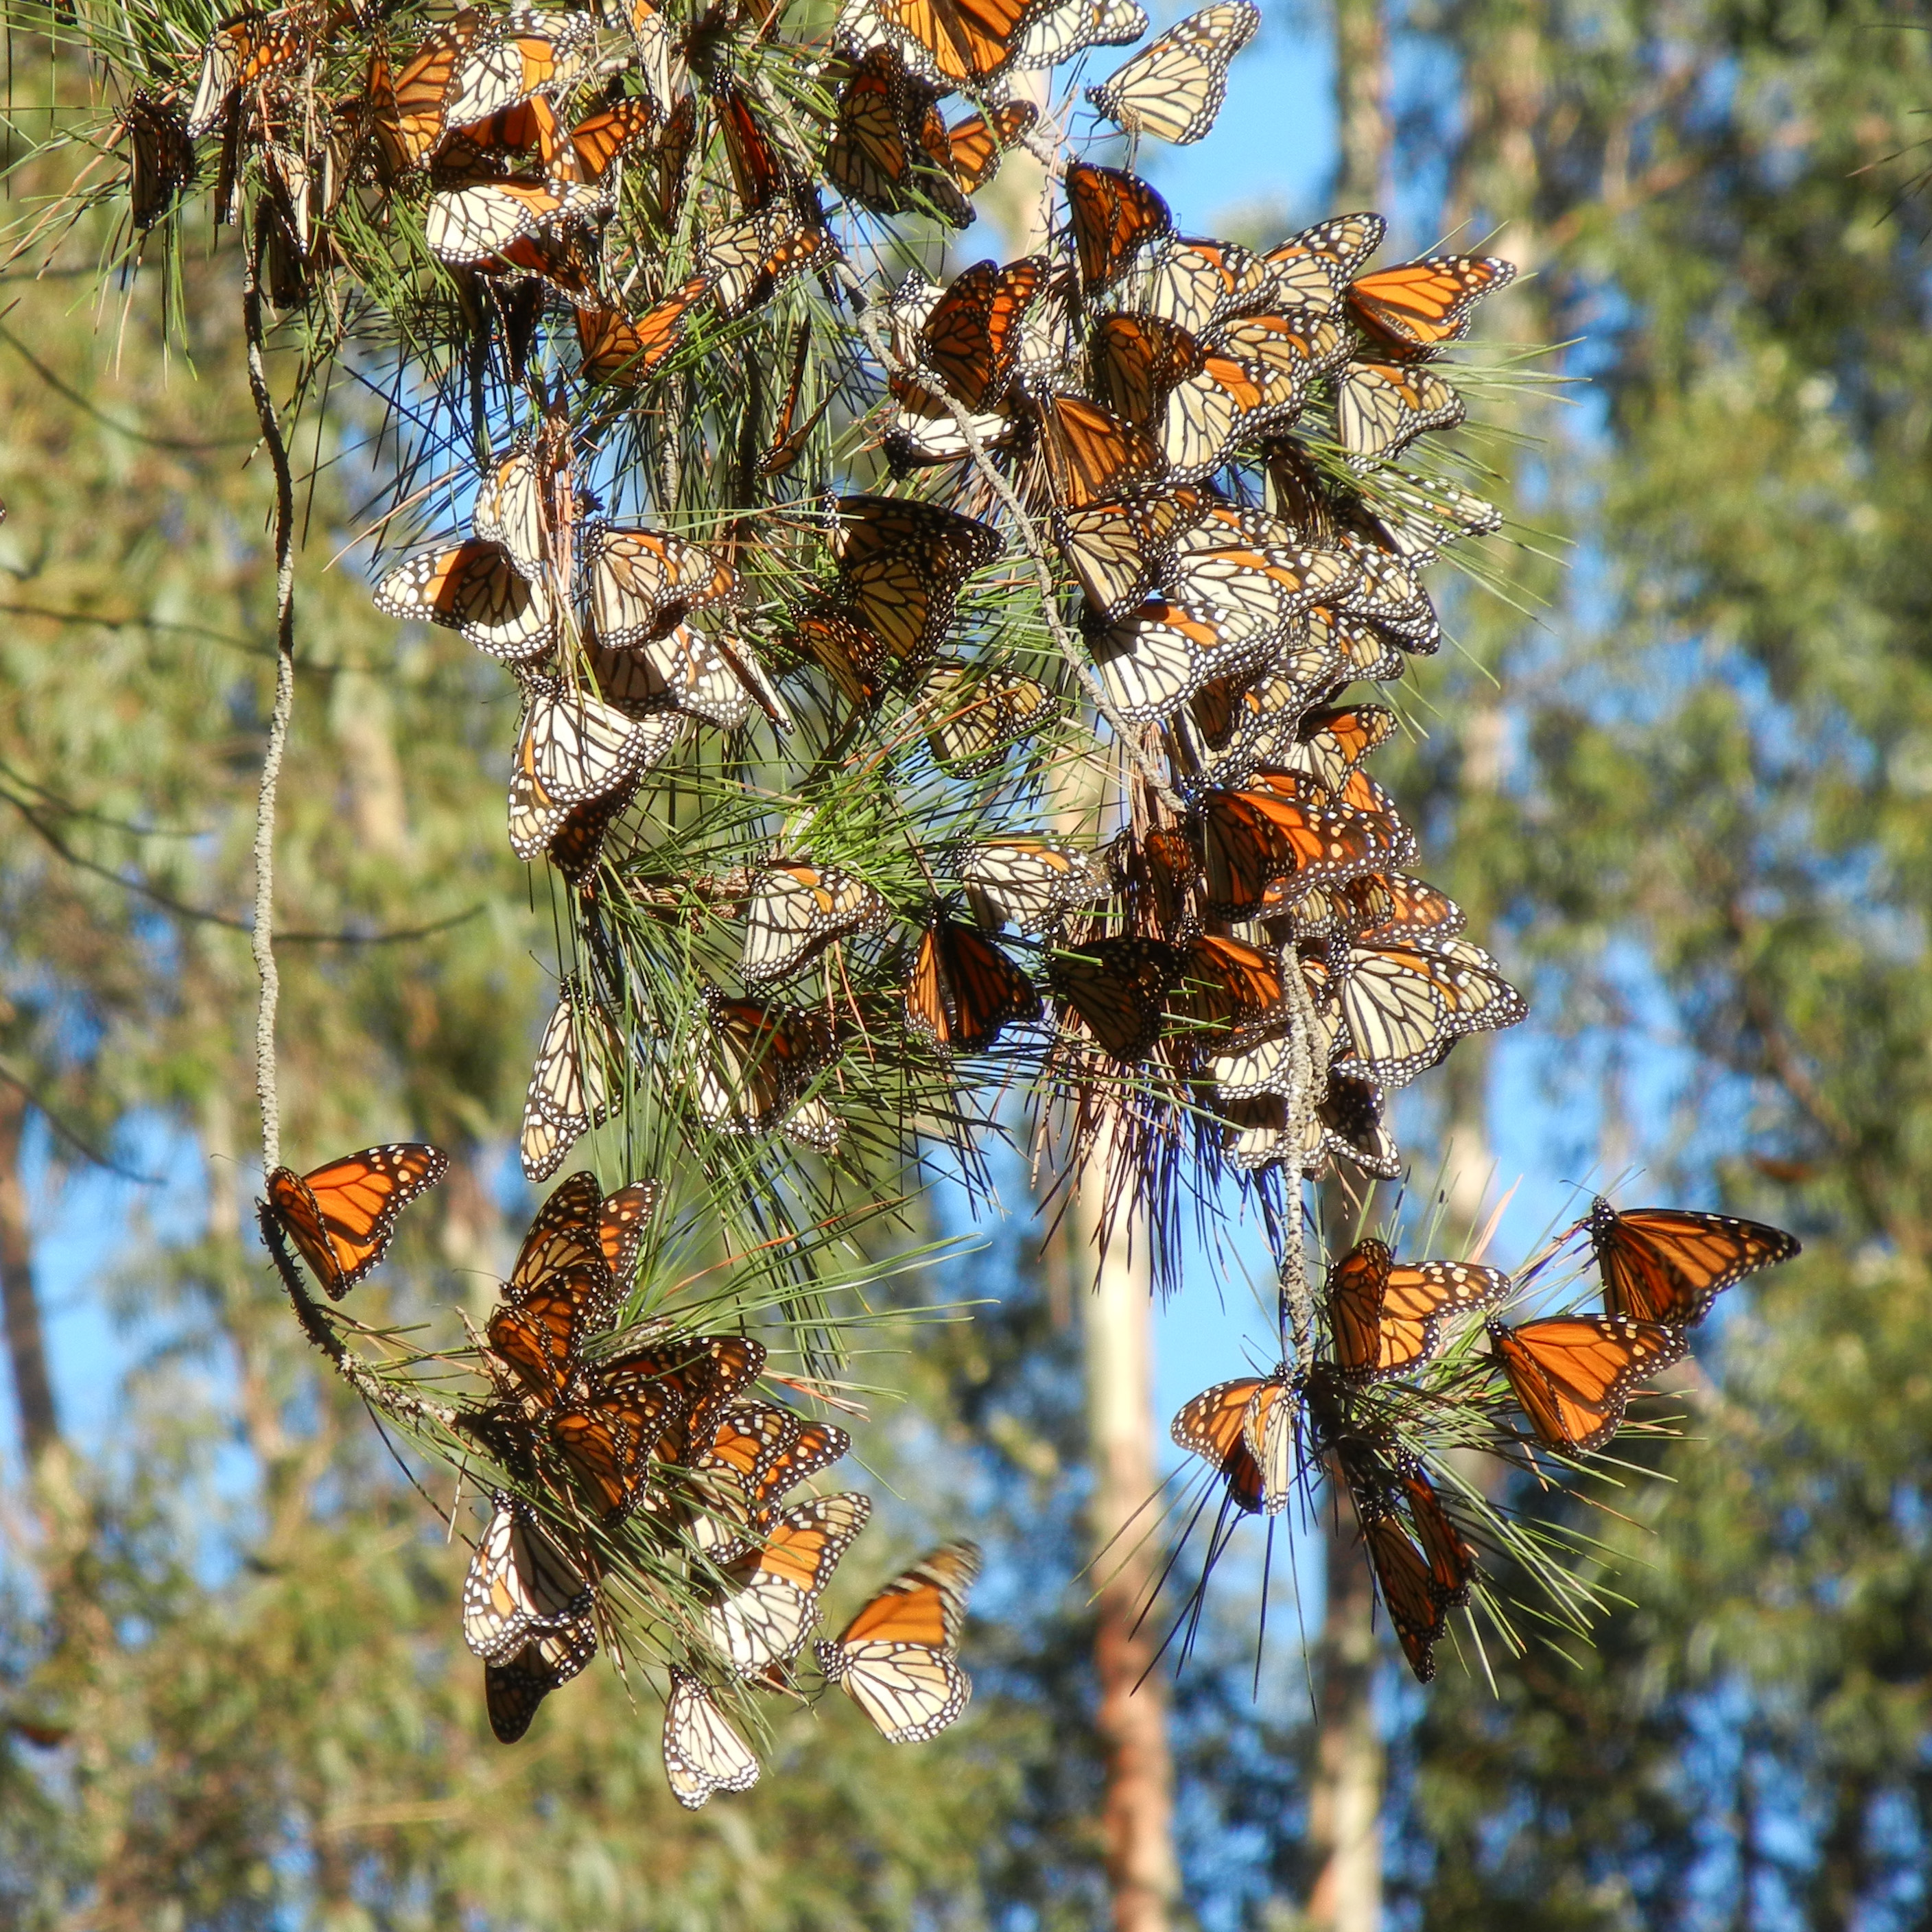 Monarchs cluster on a pine branch. The butterflies that have their wings closed are duller in color, resembling dead leaves. The butterflies with their wings open display a vibrant orange hue.